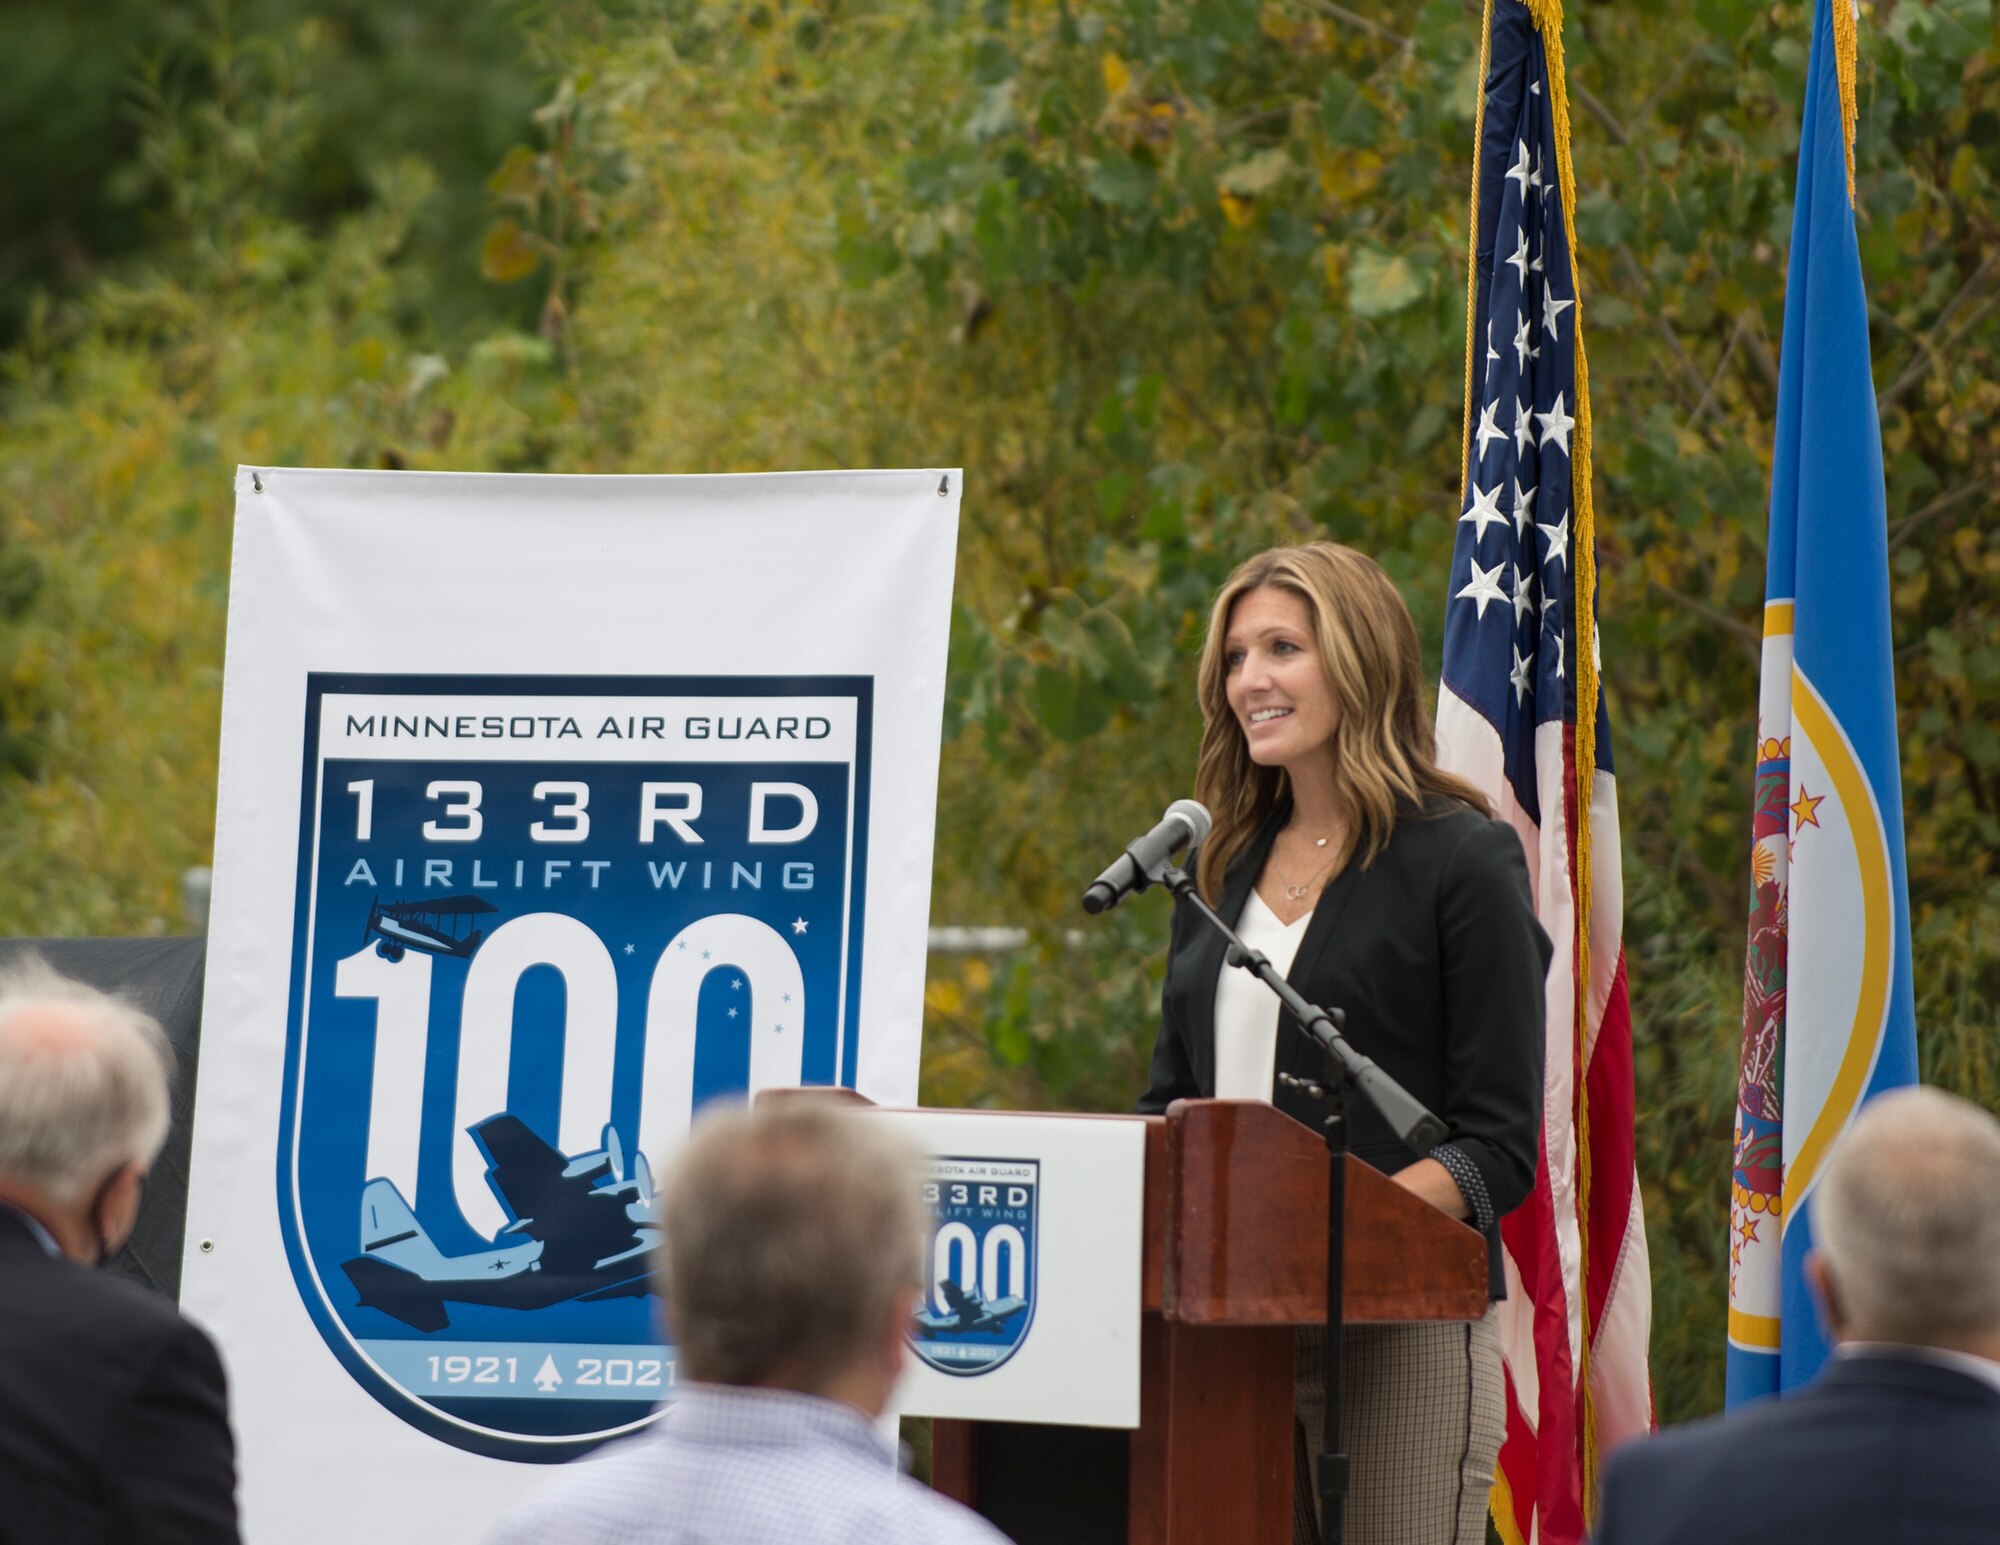 Jill Renslow, Executive Vice President of Business Development and Marketing for Mall of America announces partnership for the 133rd Airlift Wing’s centennial celebration in Falcon Heights, Minn., Sept. 26, 2020.